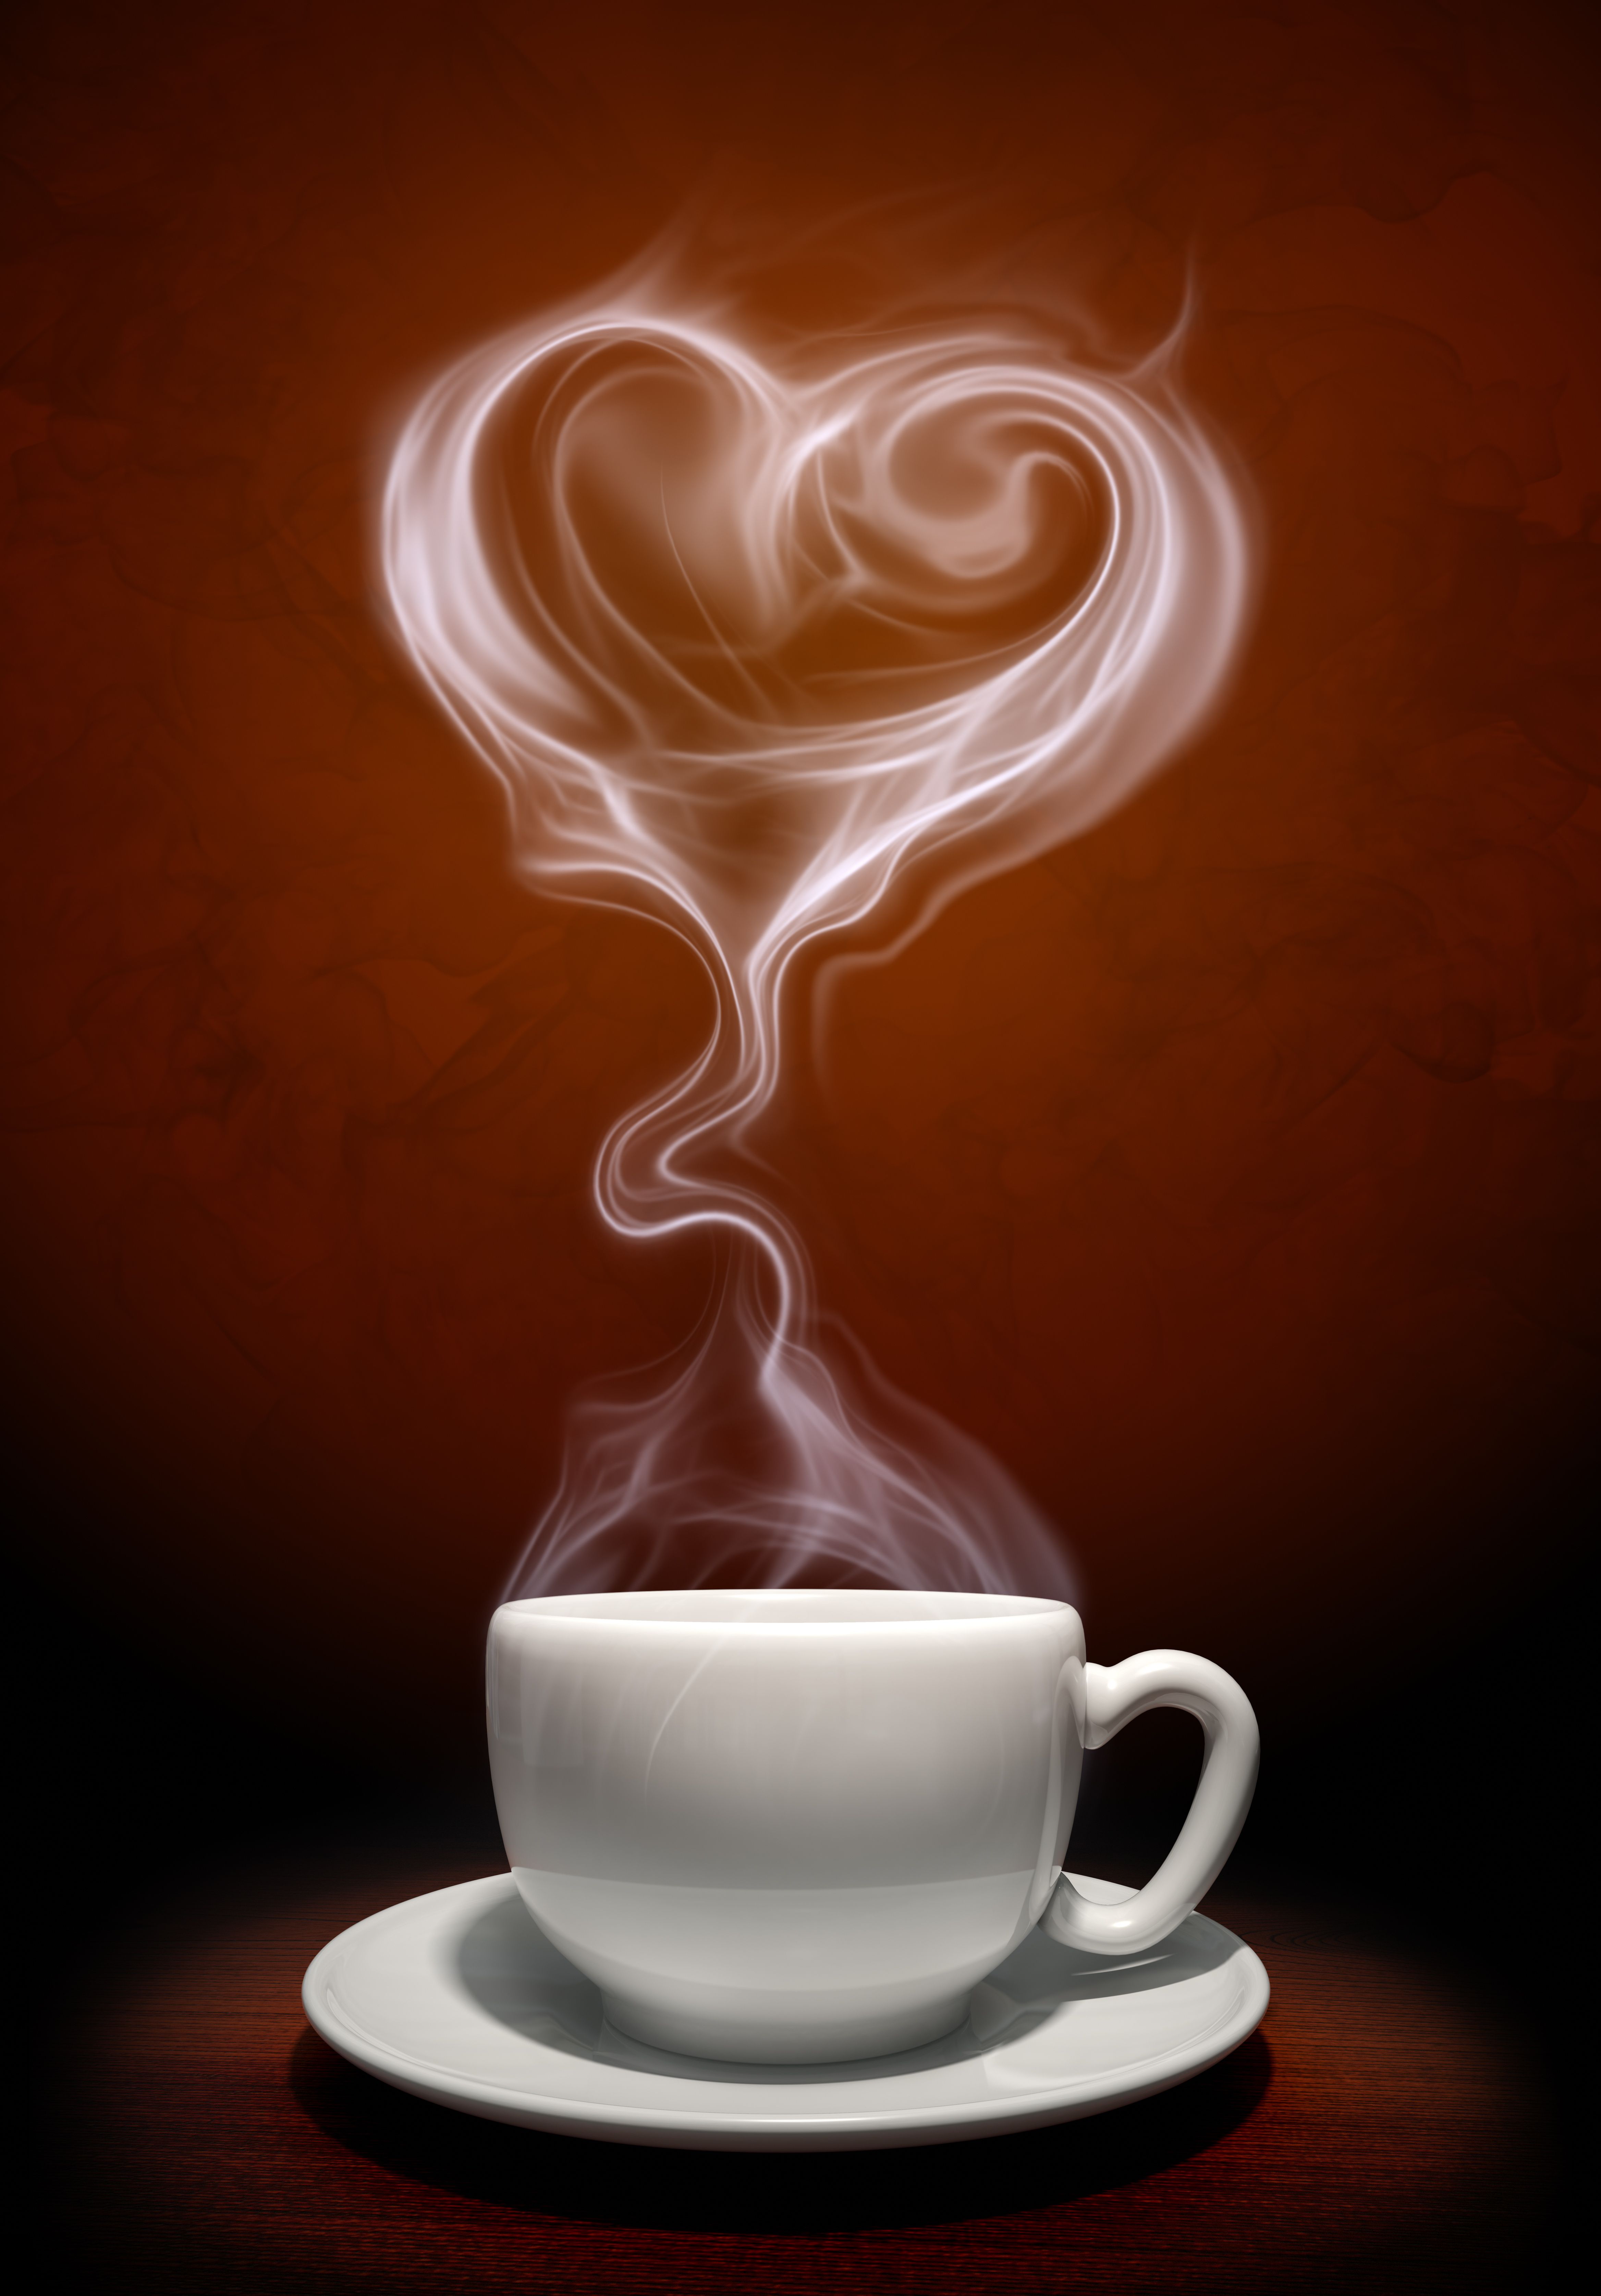 I love my hubby who makes me a cup of coffee every morning ...